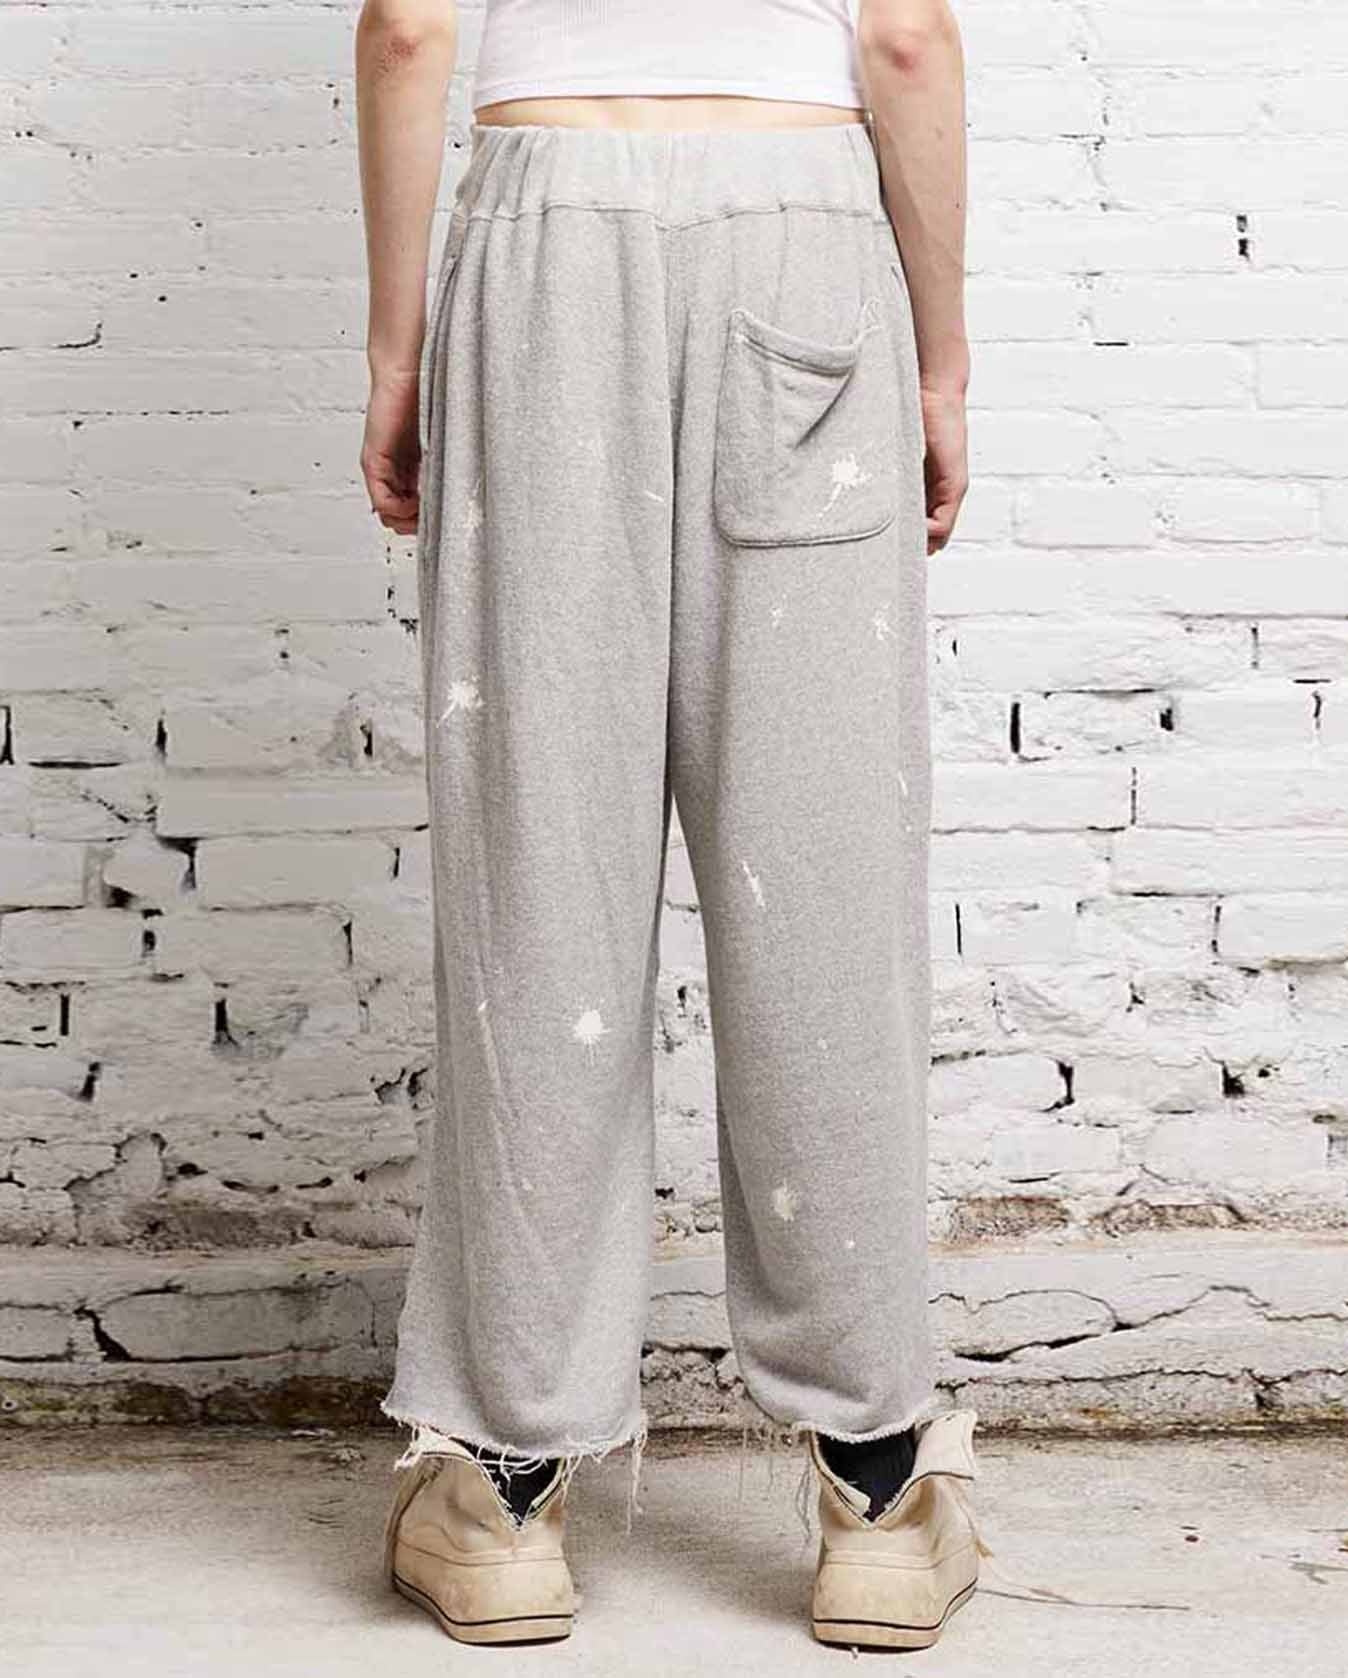 Articulated Knee High Sweatpant - Heather Grey - 2